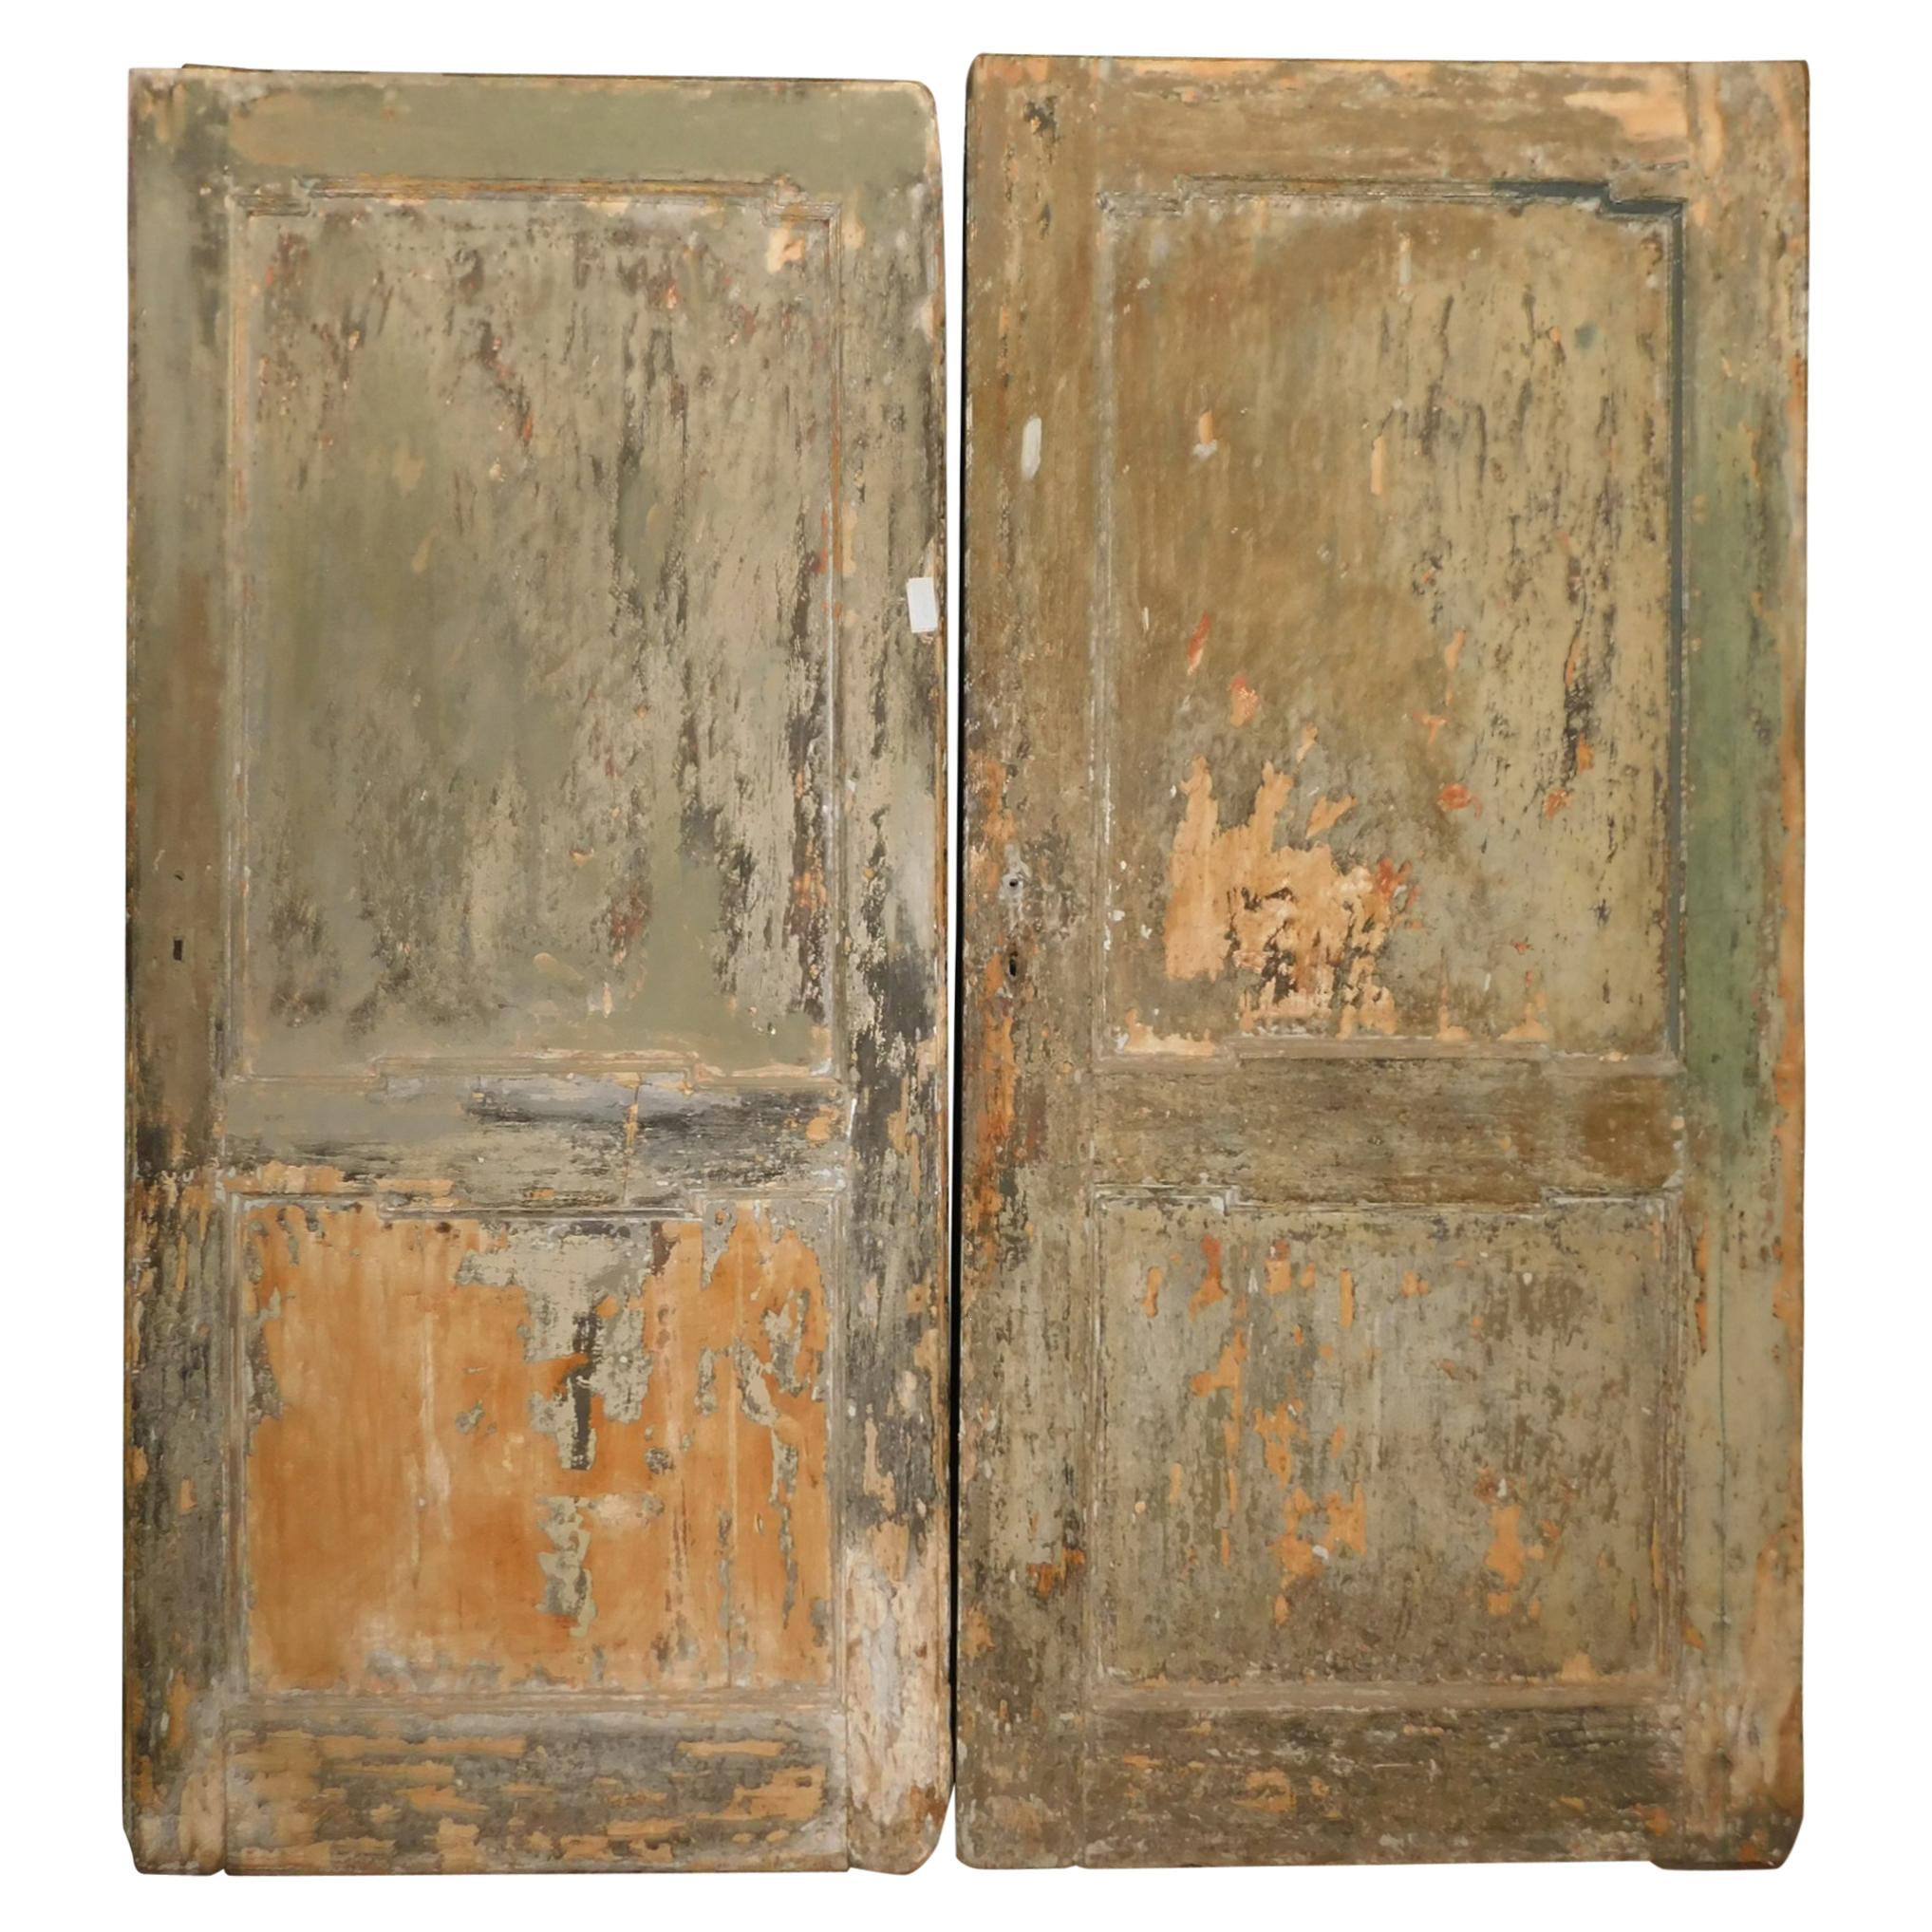 Antique Pair of Blonde Wood Doors, Lacquered Patina, 18th Century Italy